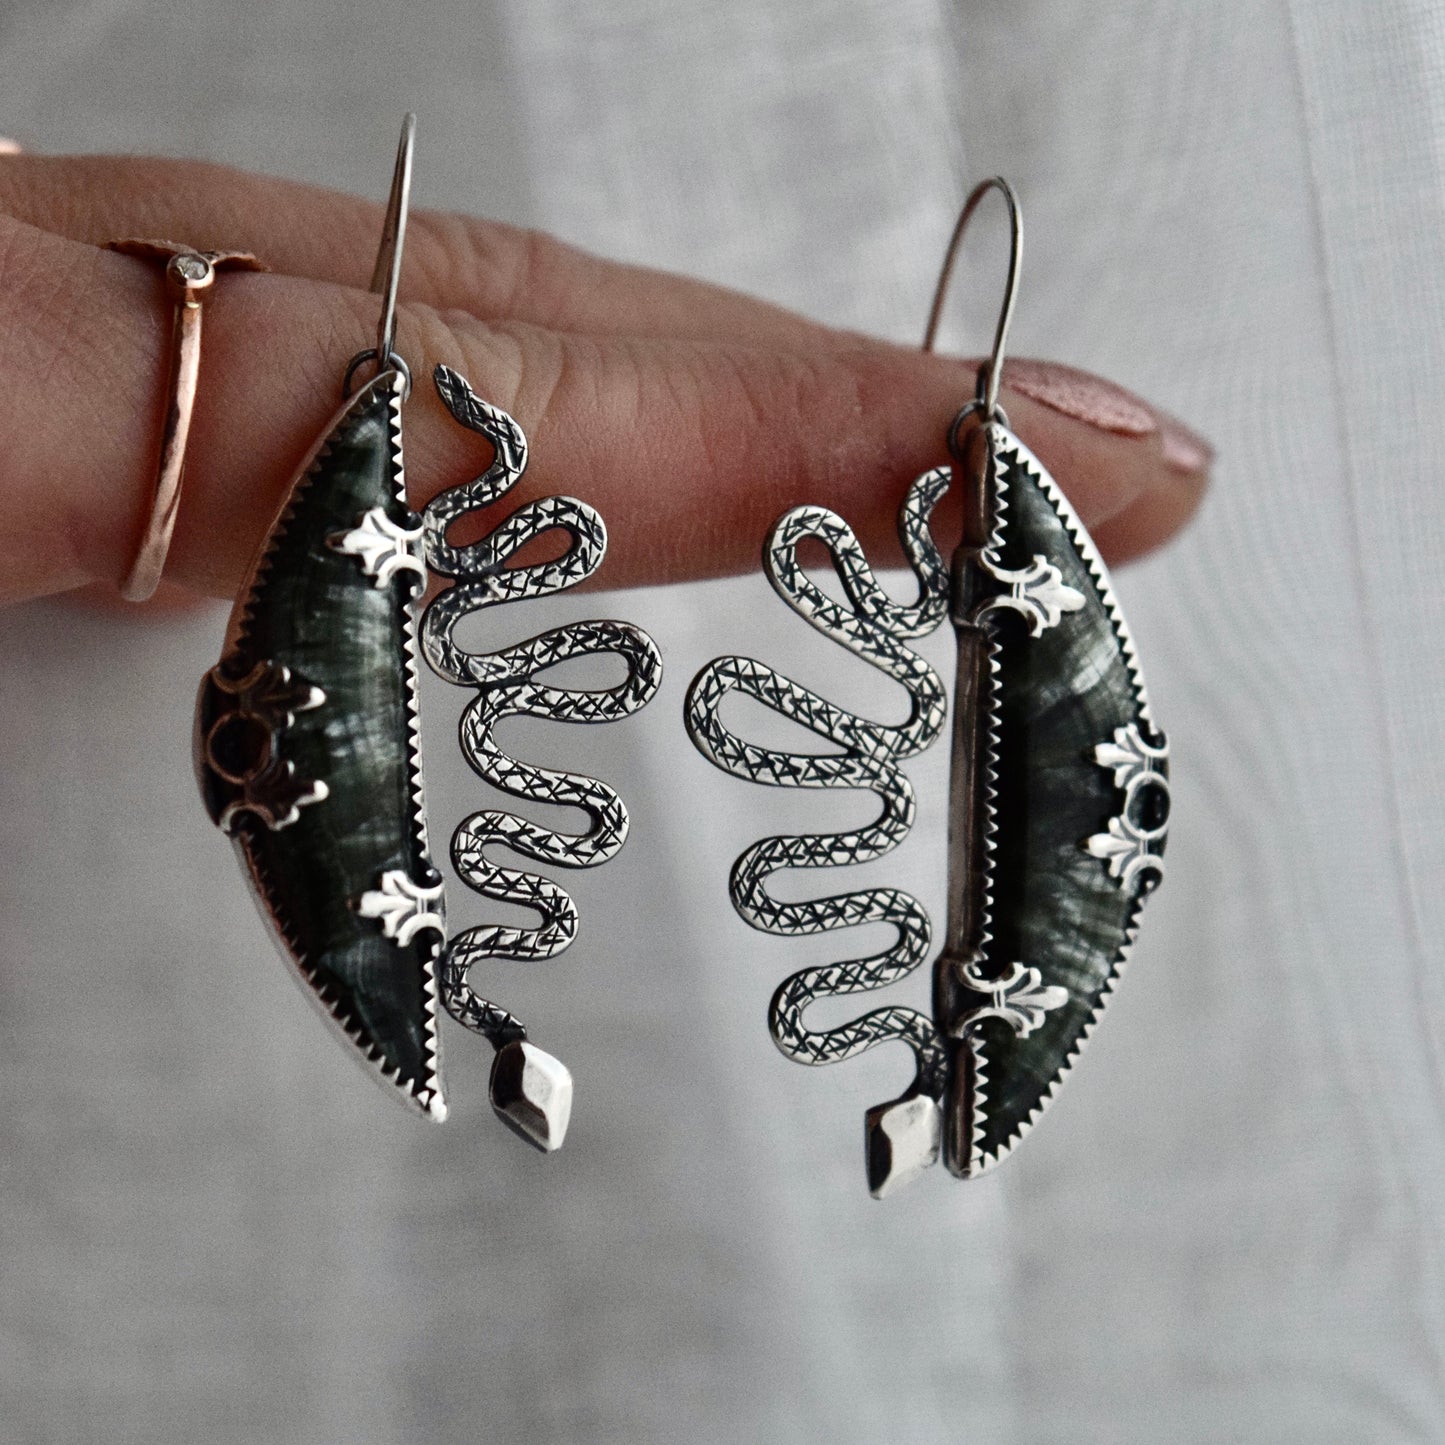 The Serpent House Statement Earrings with Seraphinite